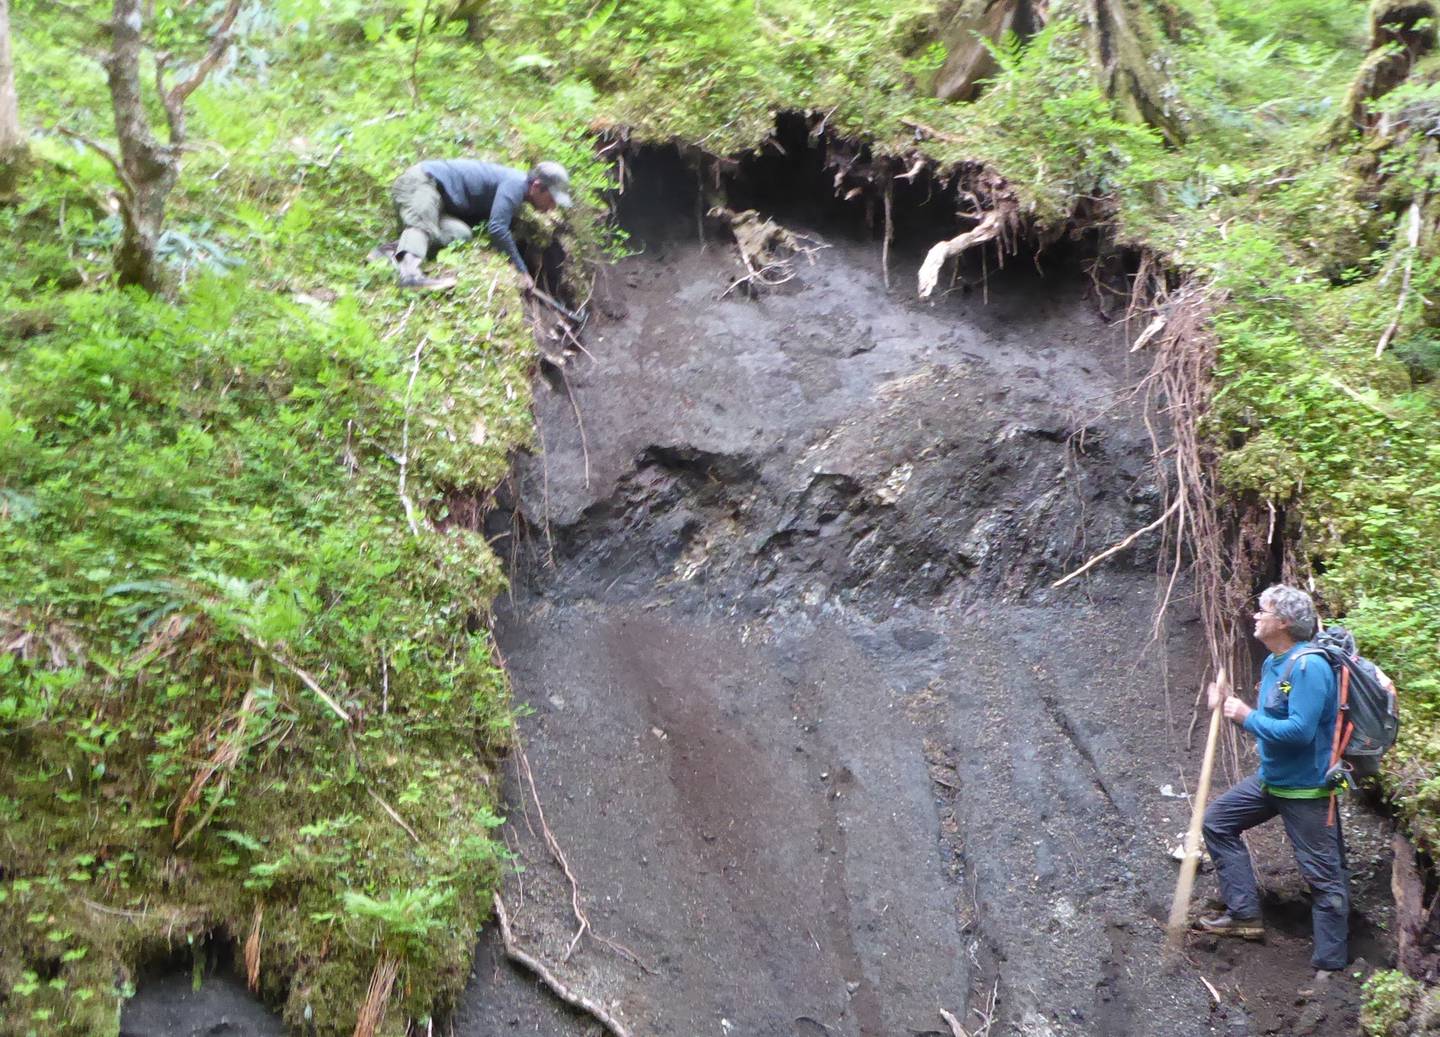 Ben Gaglioti and Dan Mann check an exposed section of ground